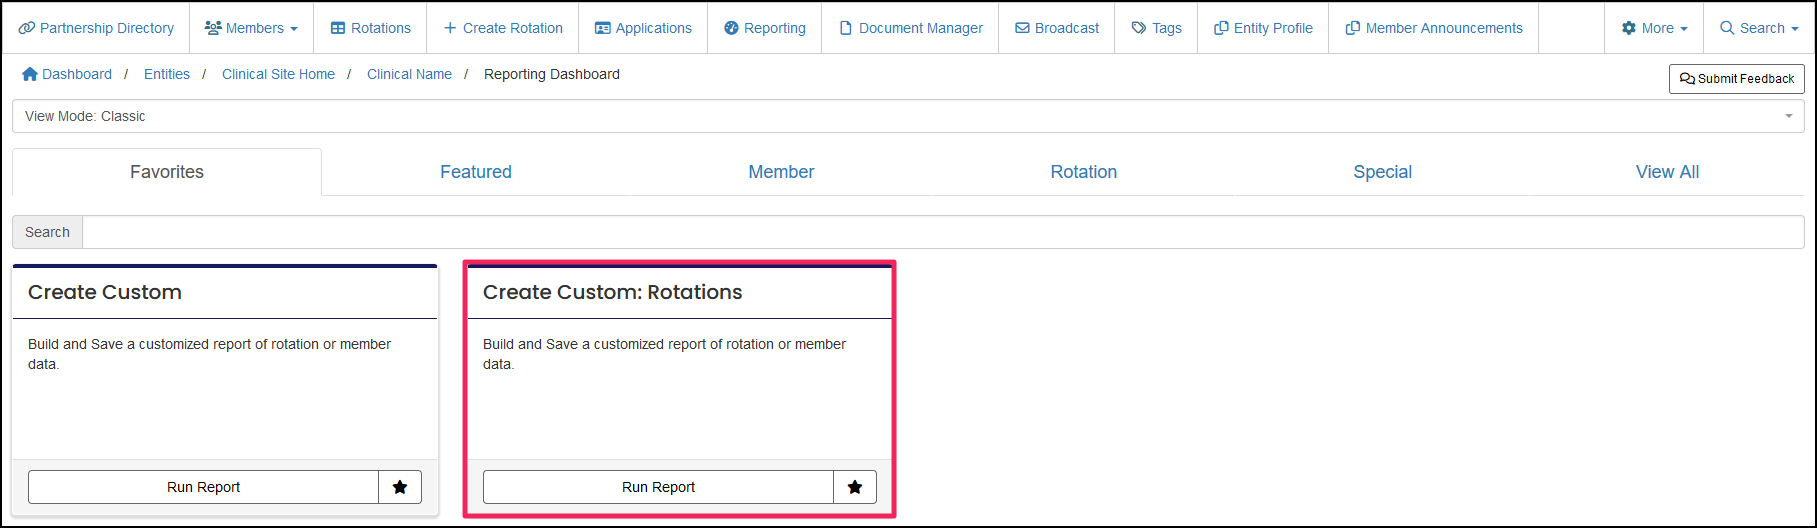 image shows favorites tab in reporting dashboard with saved report congif